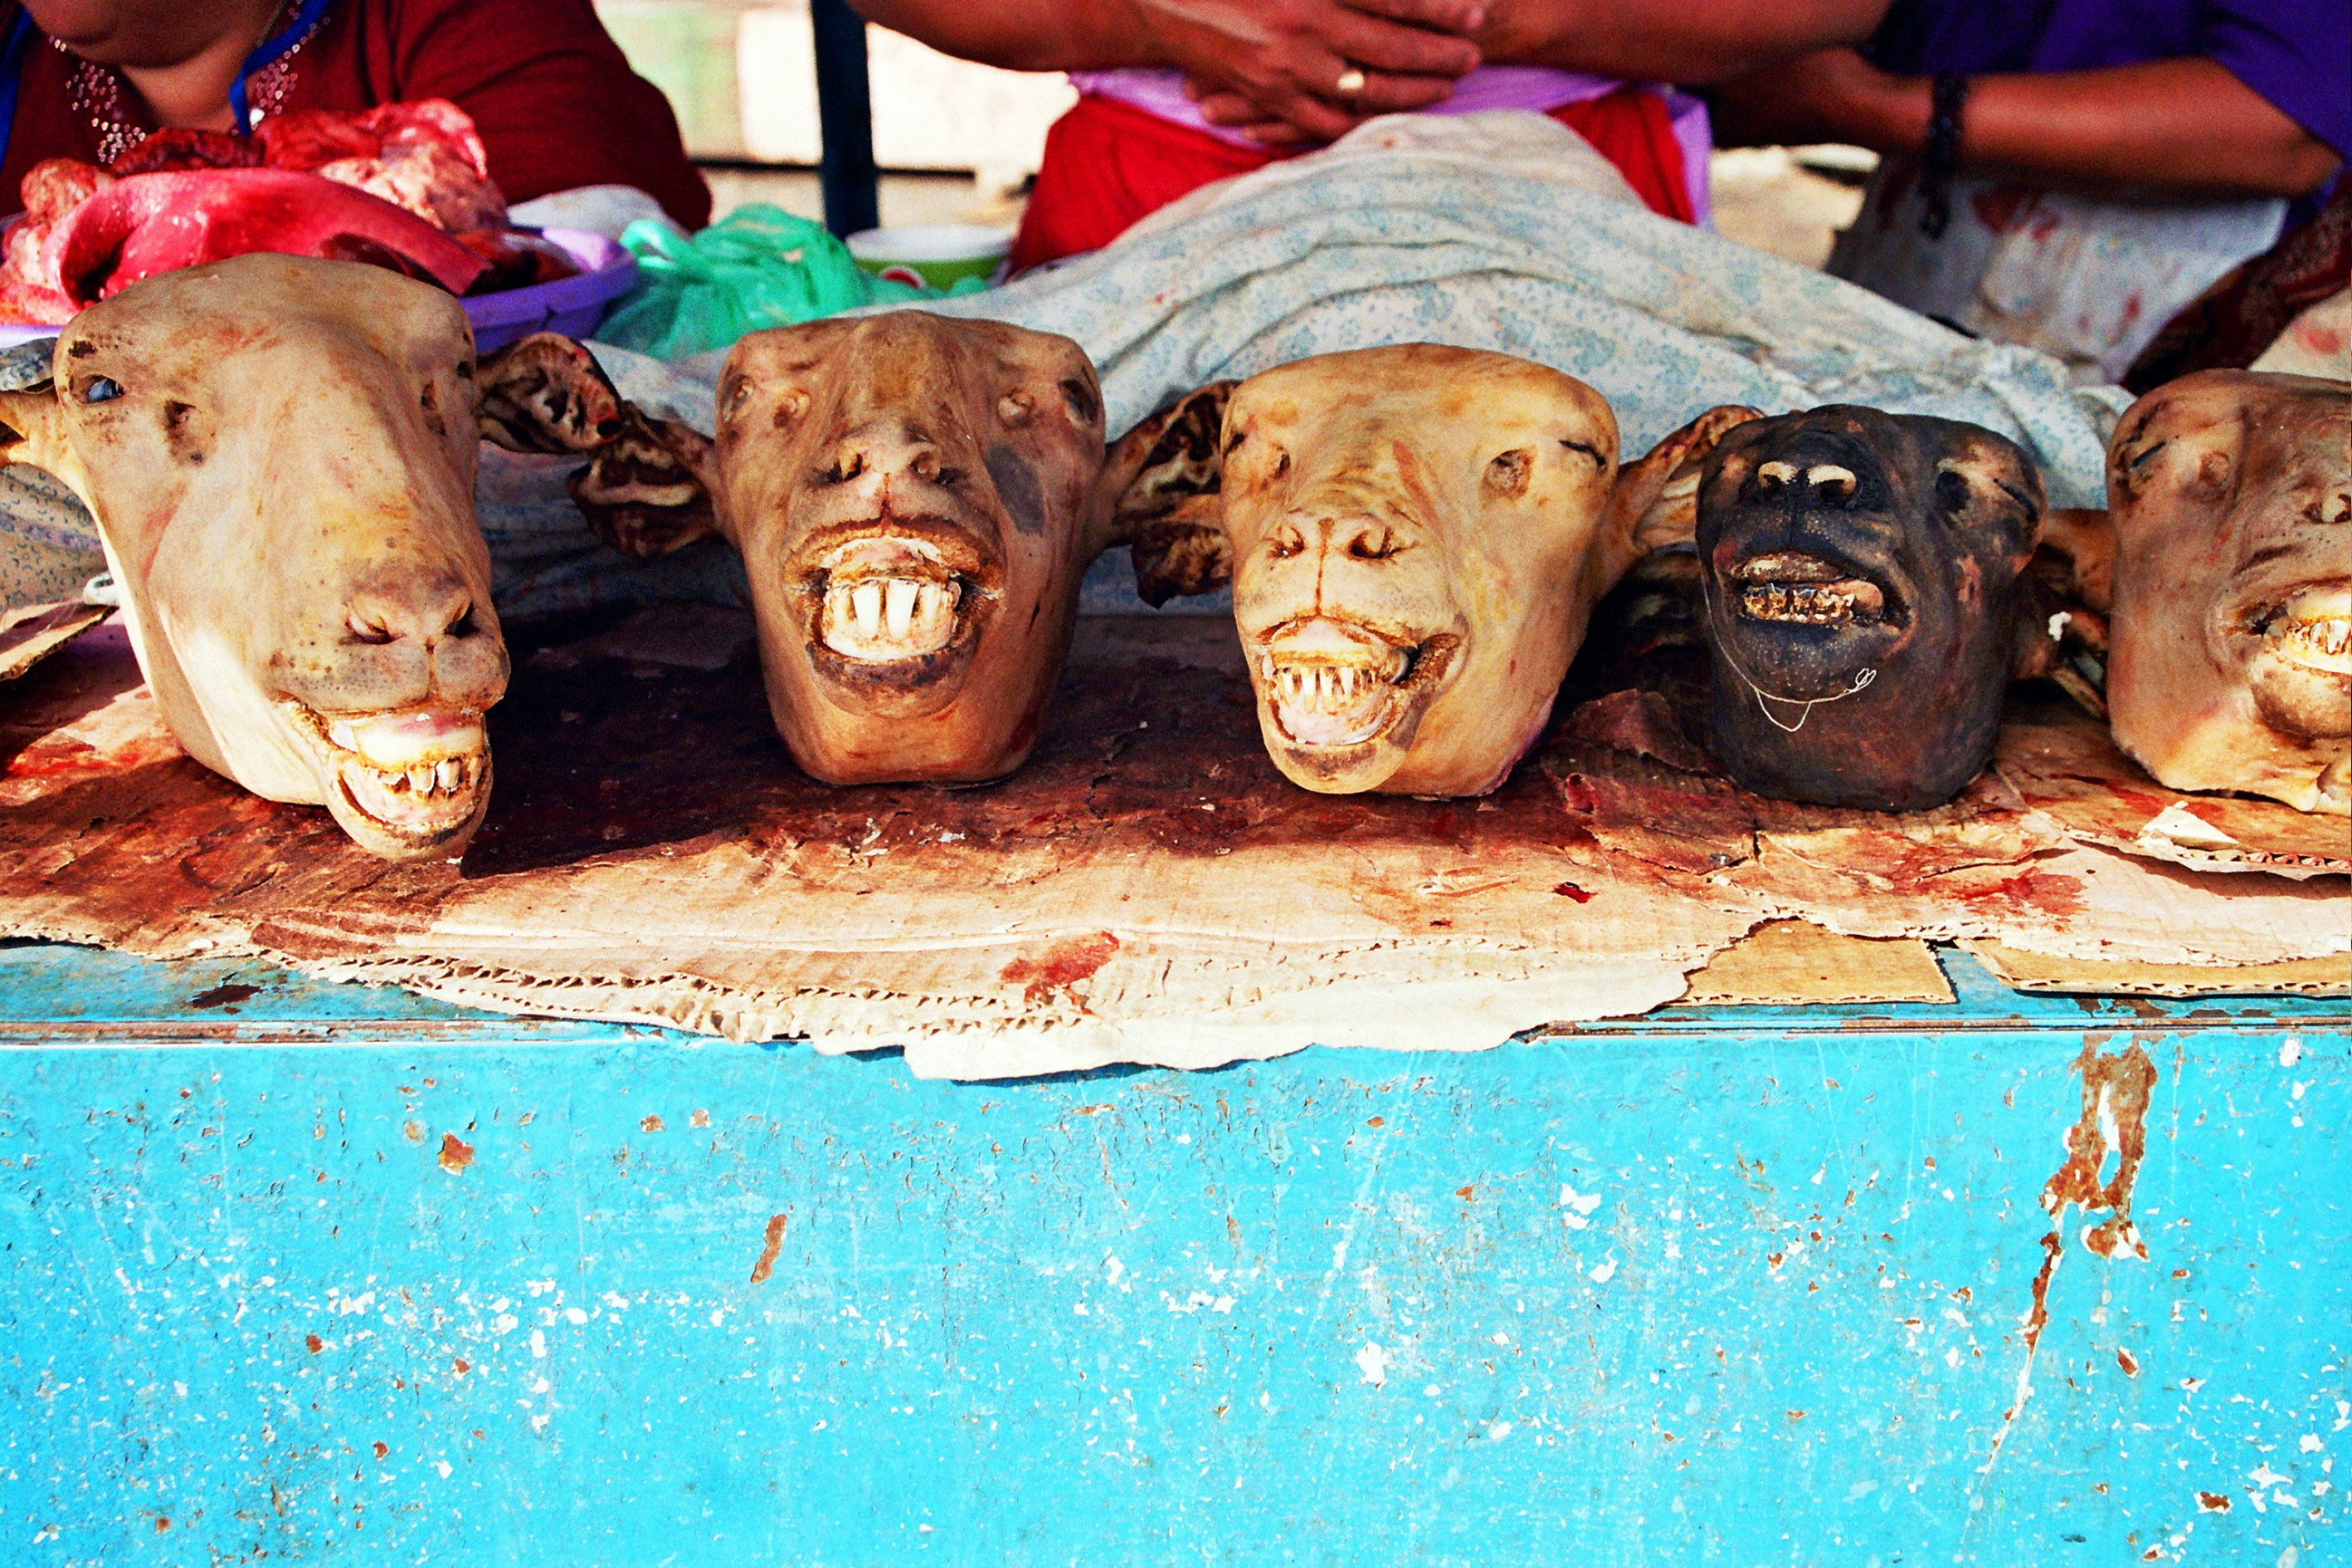 A row of five goat heads on top of a bright blue surface.